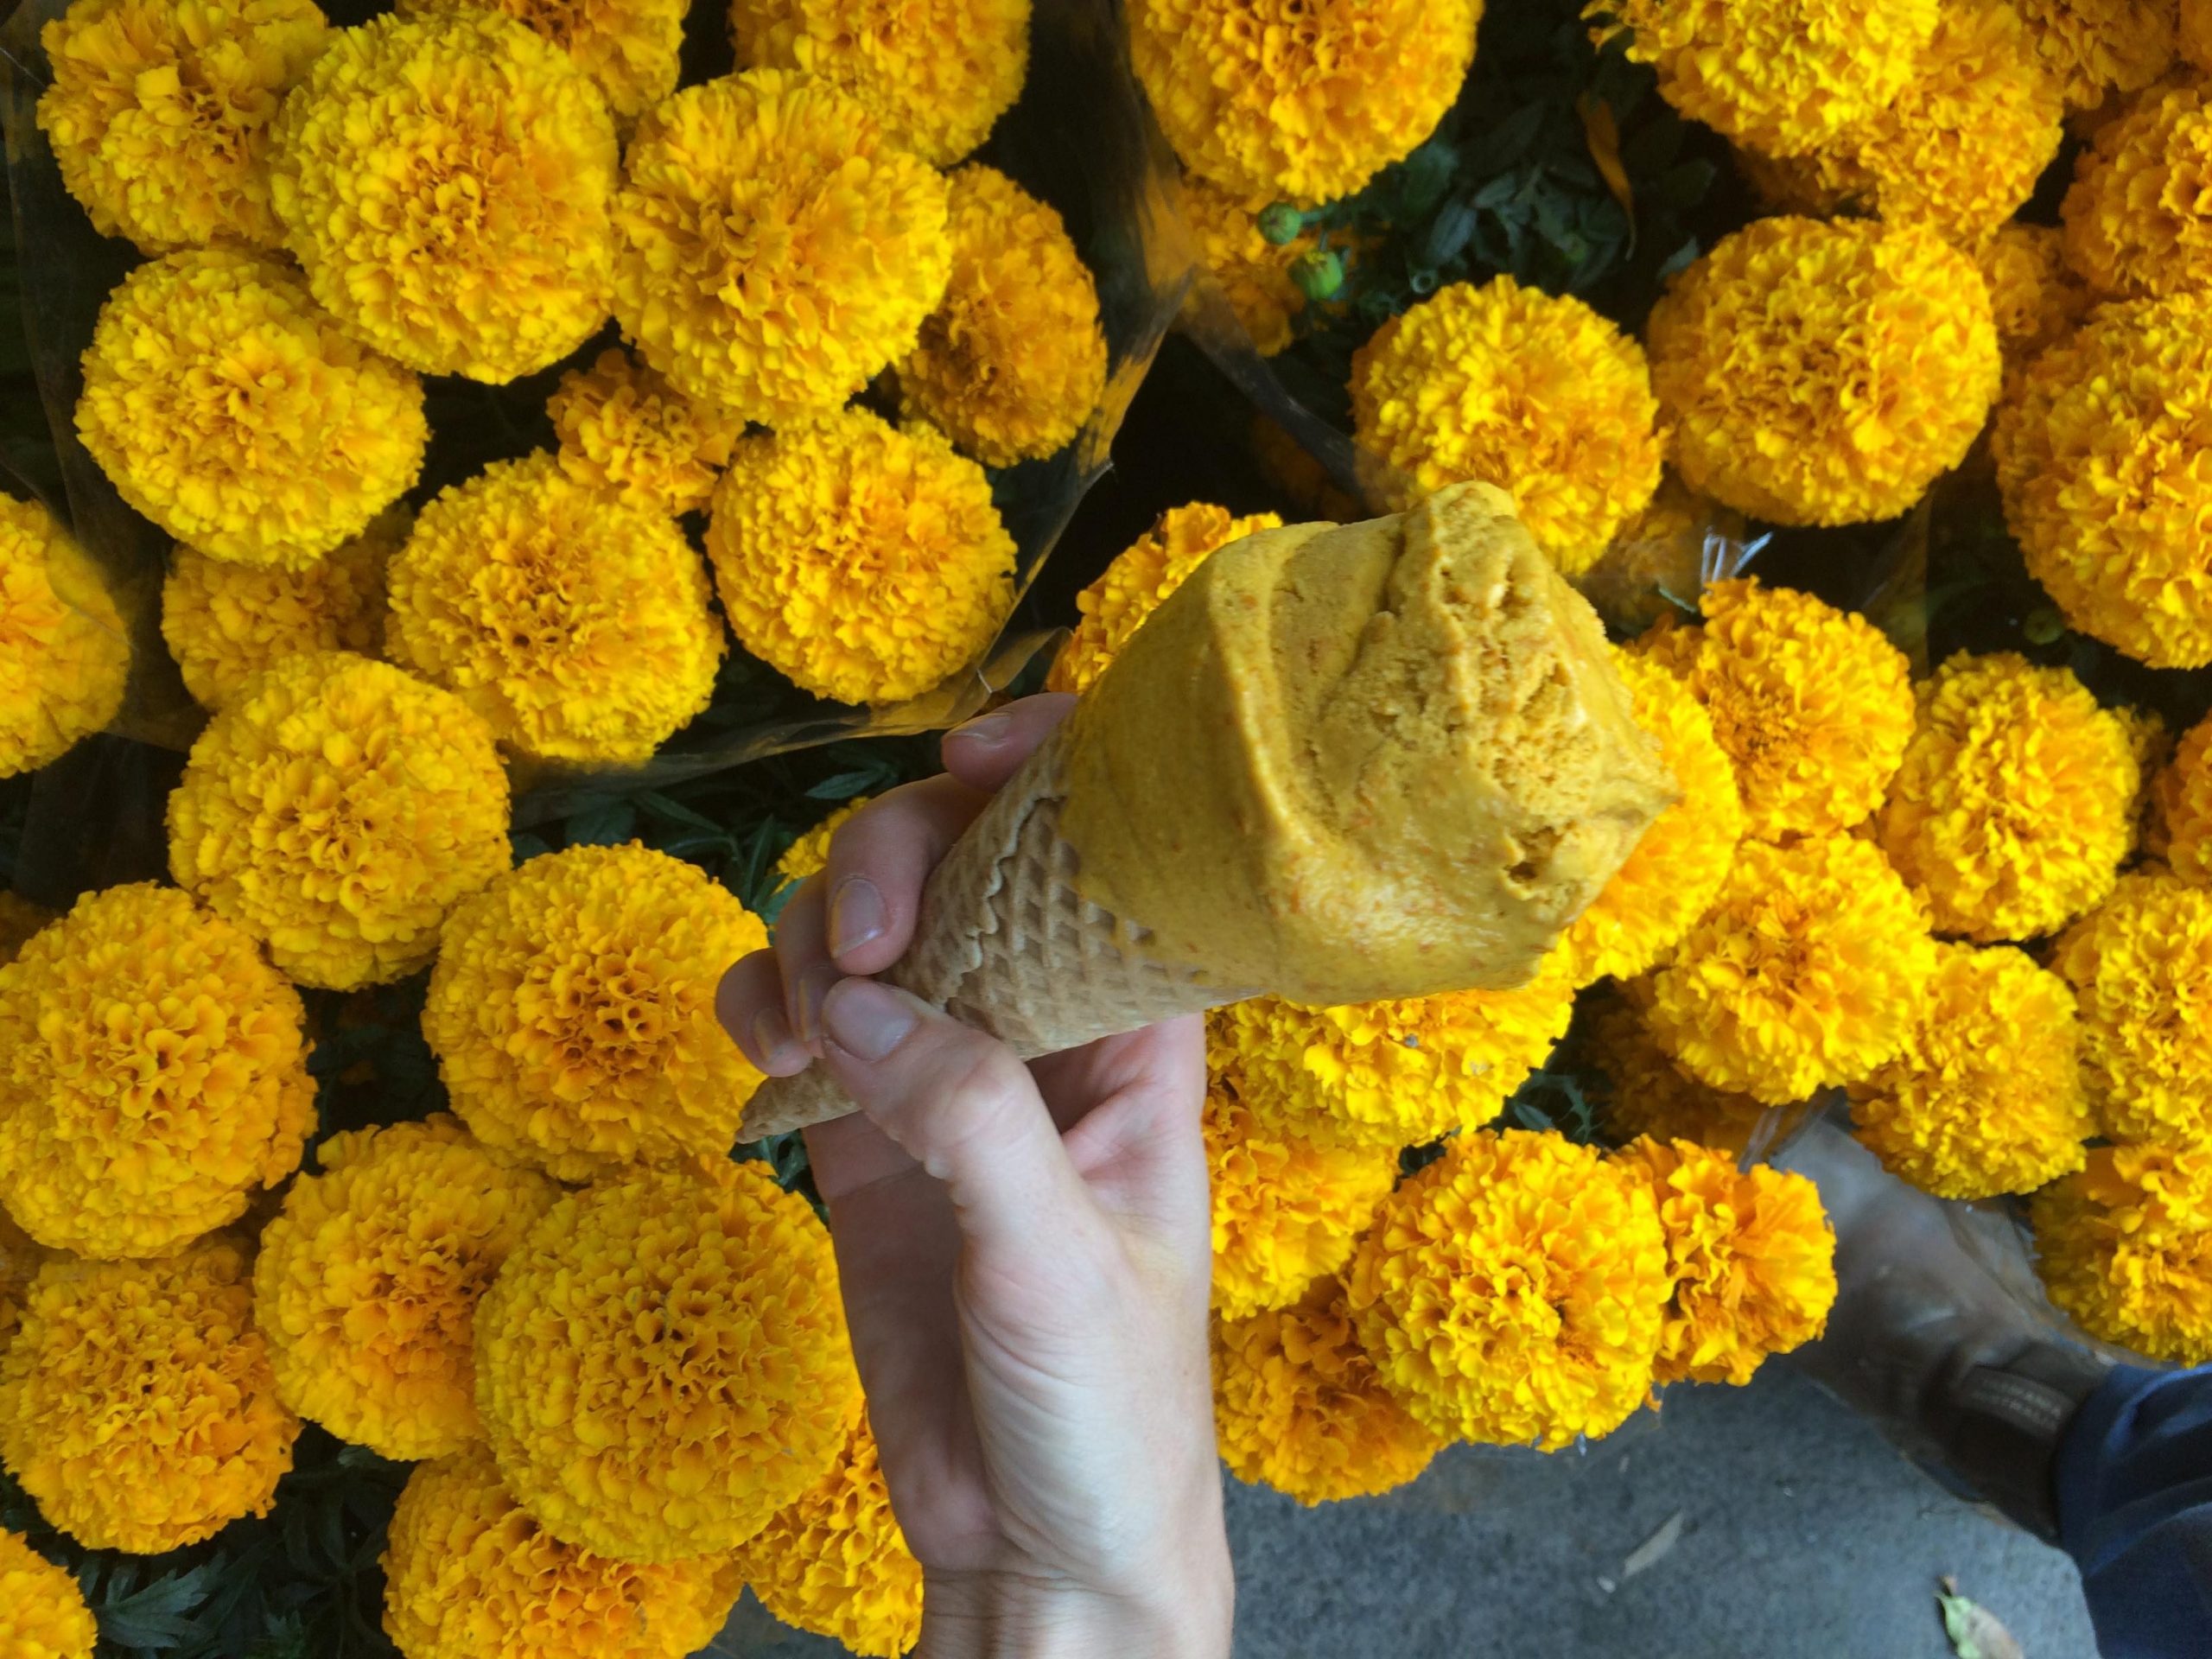 Natural Dye Project: Marigolds